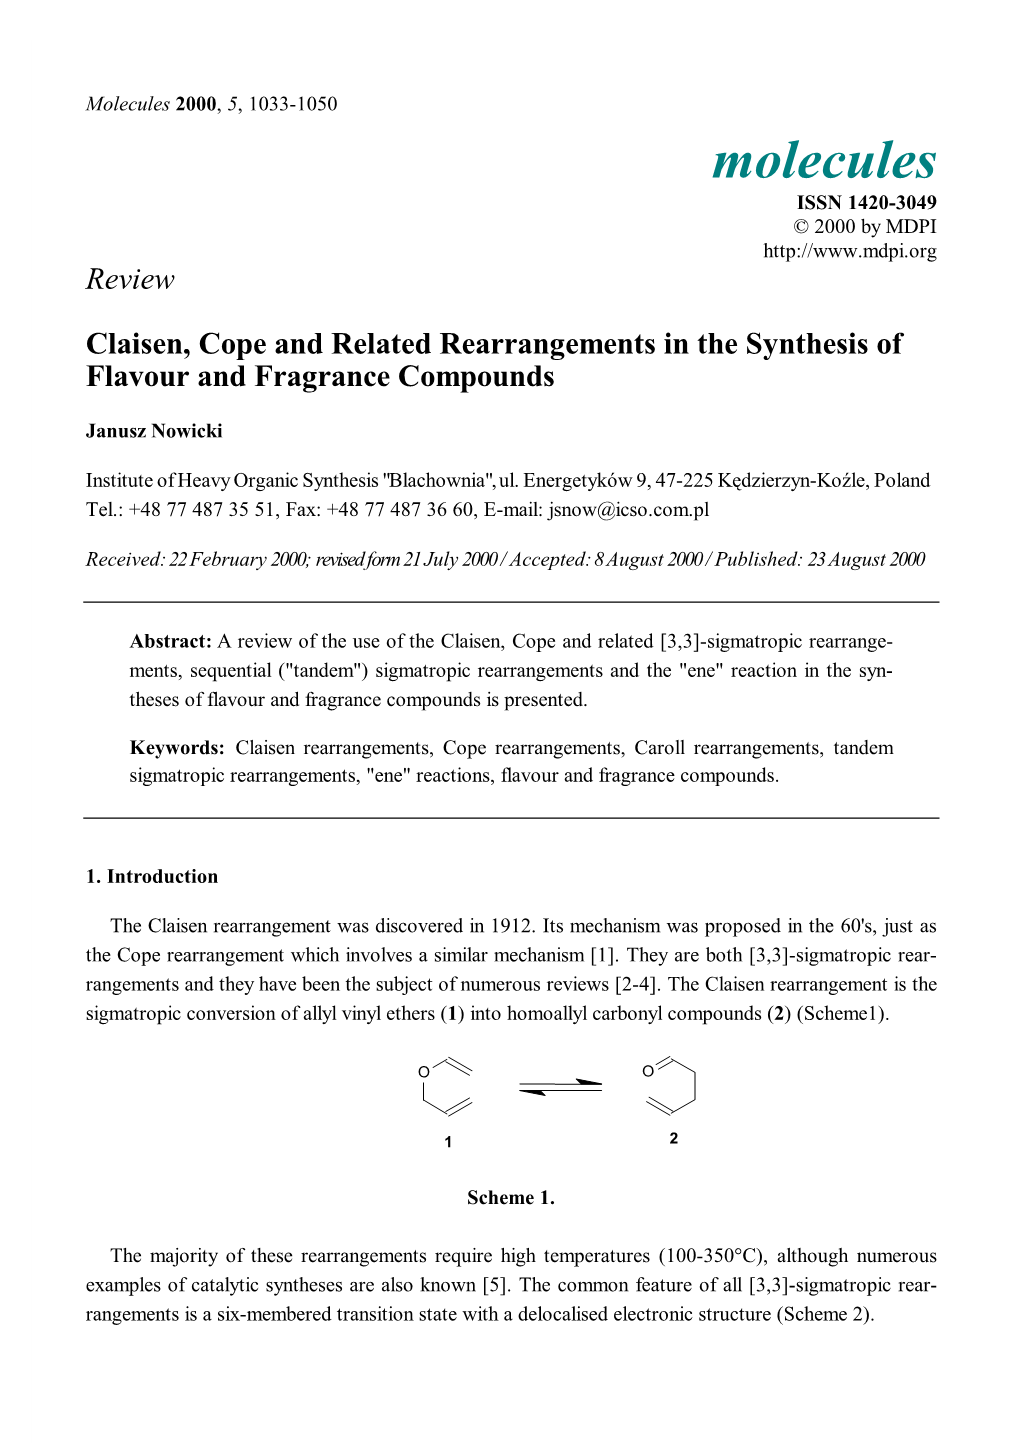 Review Claisen, Cope and Related Rearrangements in The